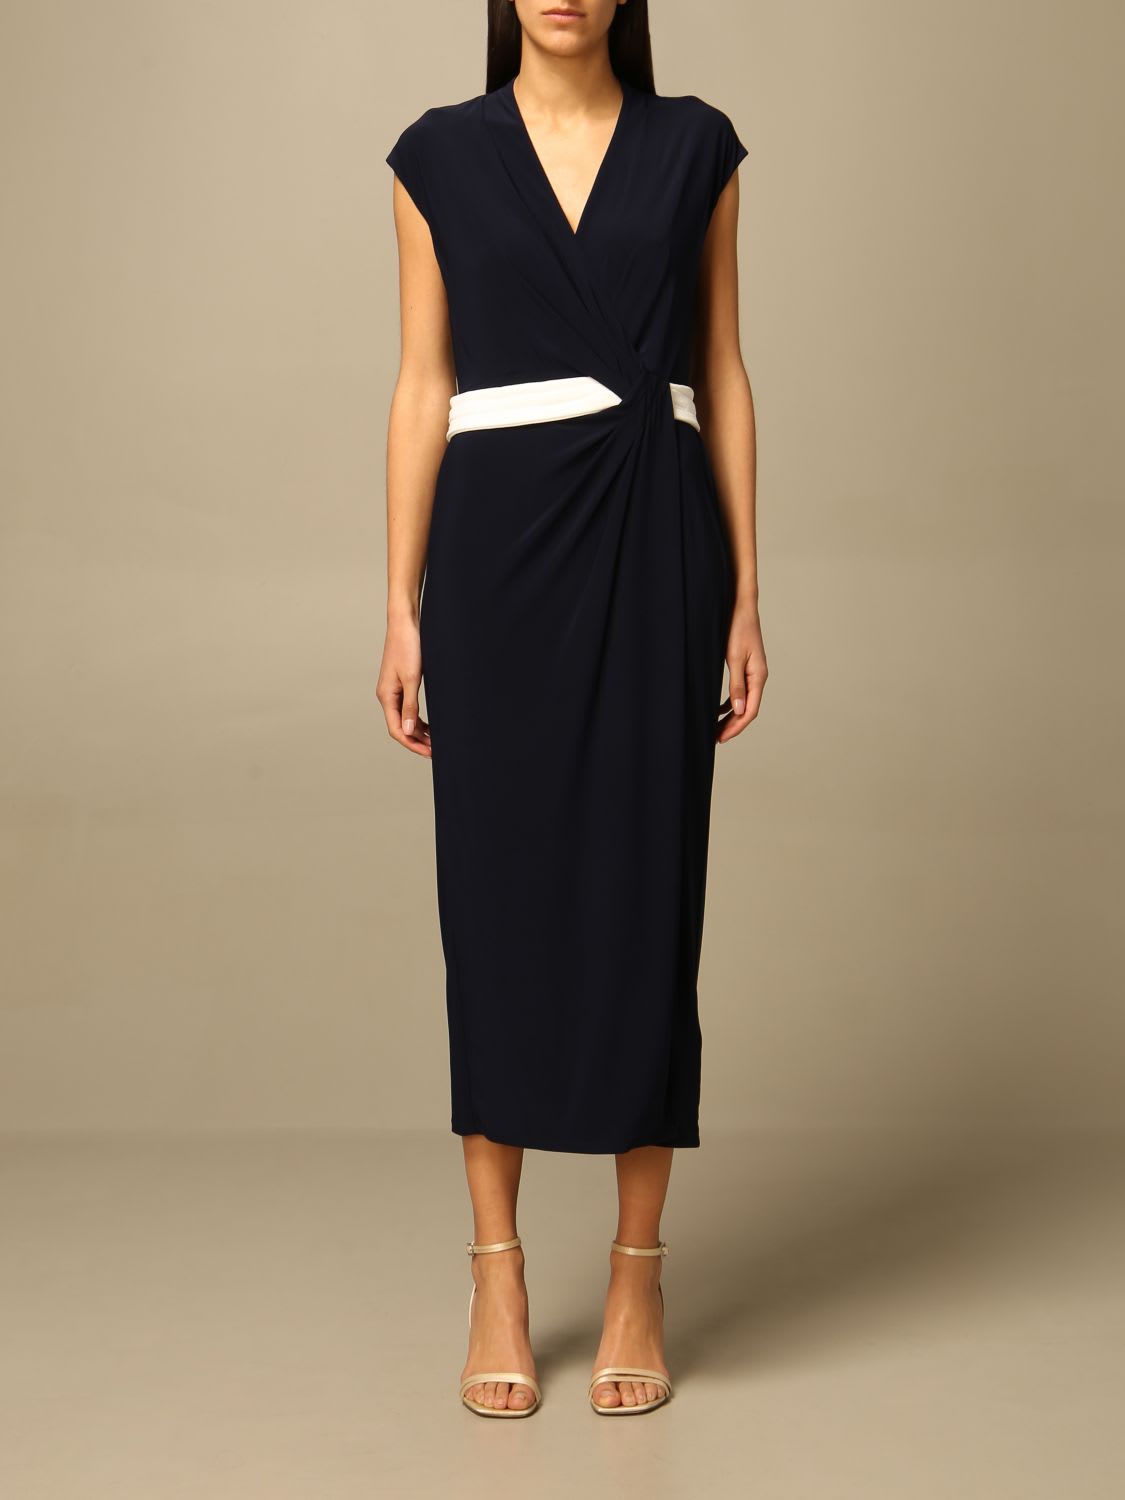 Lauren Ralph Lauren Dress Lauren Ralph Lauren Midi Dress With Knot